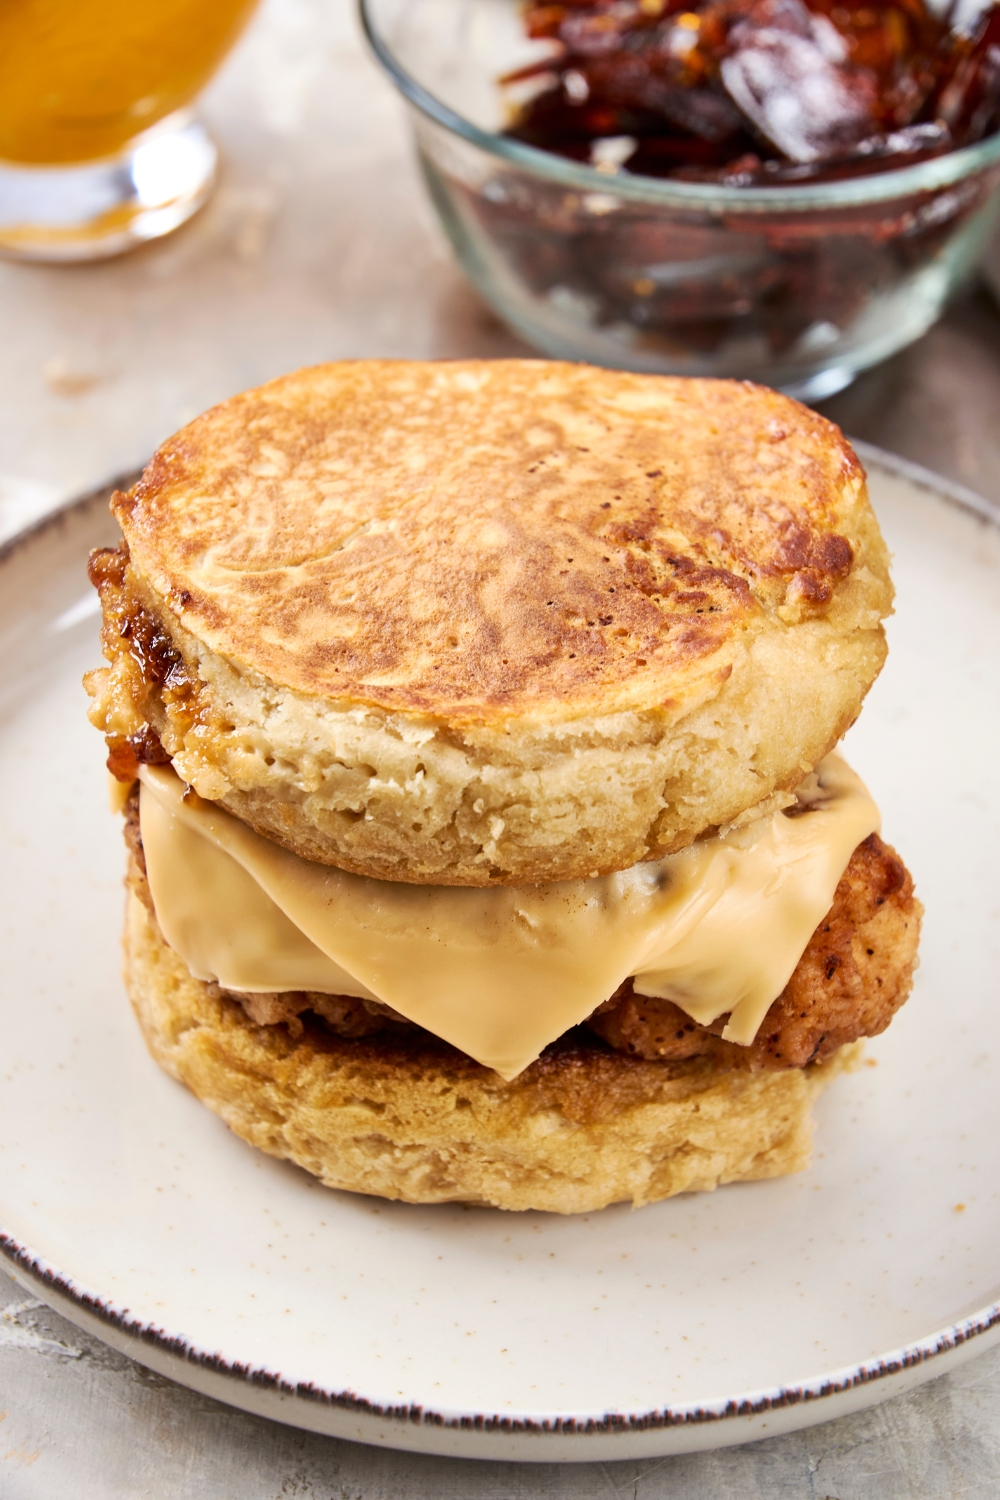 A crispy fried piece of chicken is sandwiched between two perfectly cooked hot cakes.